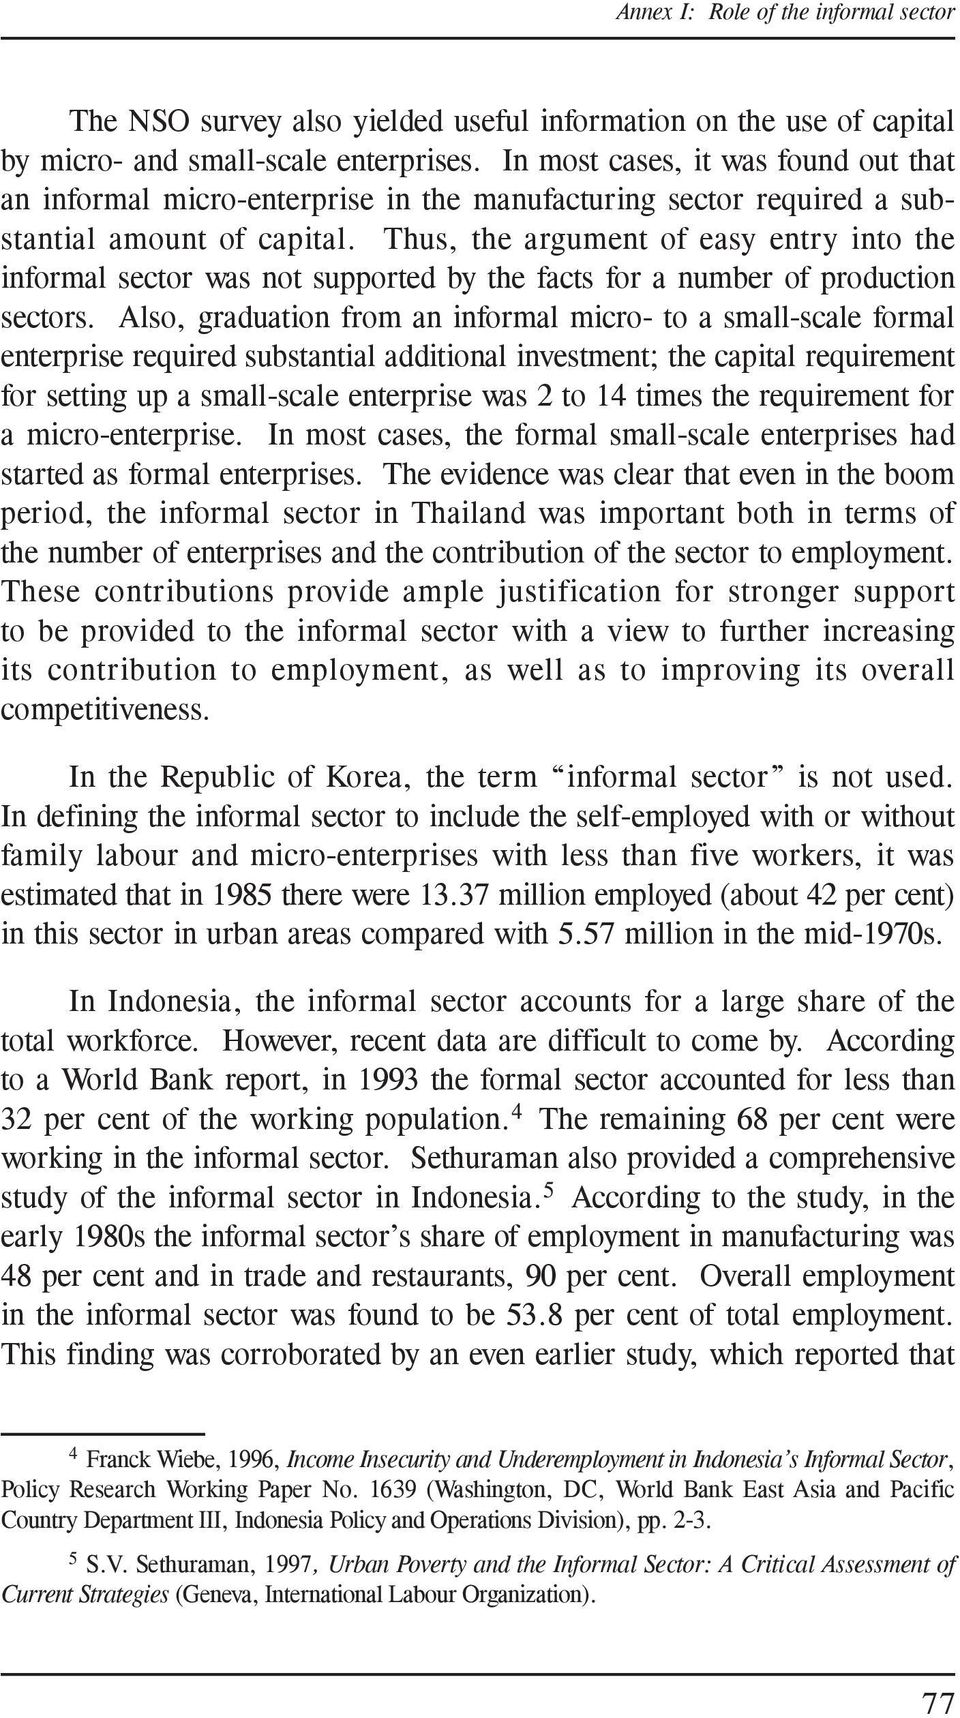 Thus, the argument of easy entry into the informal sector was not supported by the facts for a number of production sectors.